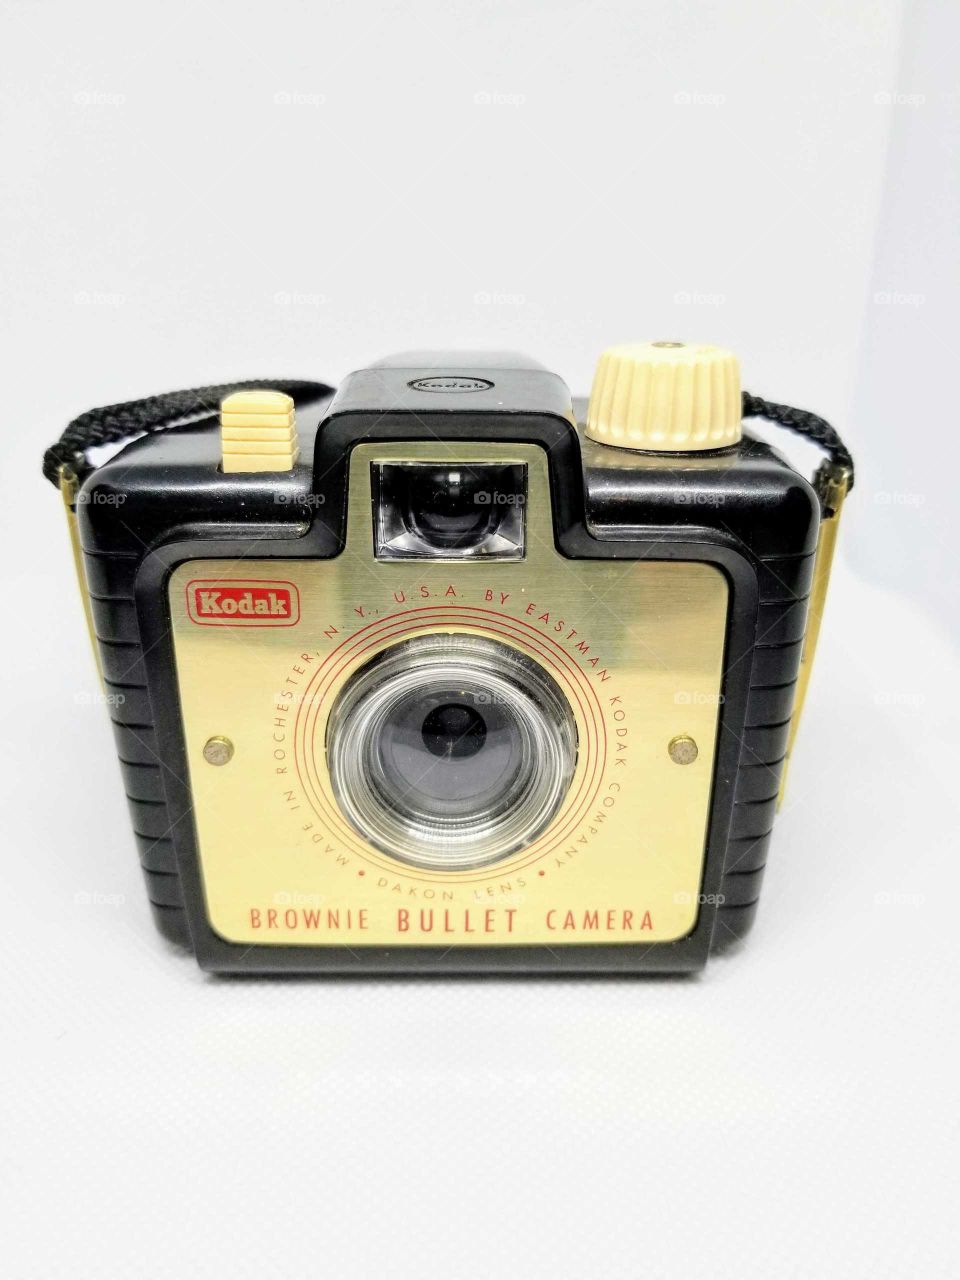 Kodak Brownie Bullet camera from 1960's has a nice gold front plate and bakelite body.